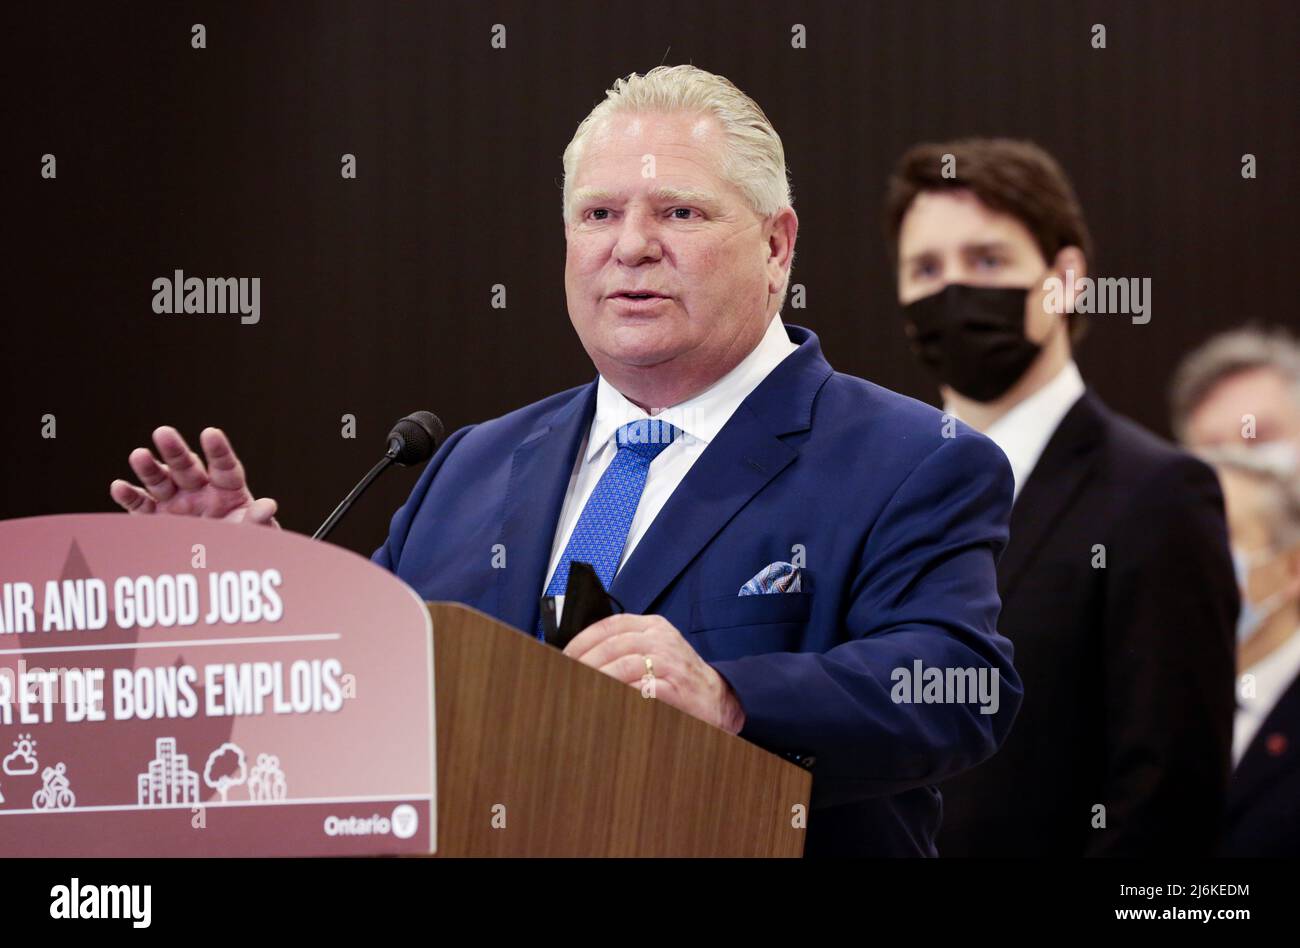 Ontario Premier Doug Ford speaks at the Stellantis Automotive Research and Development Centre in Windsor, Ontario, Canada May 2, 2022. REUTERS/Rebecca Cook Stock Photo